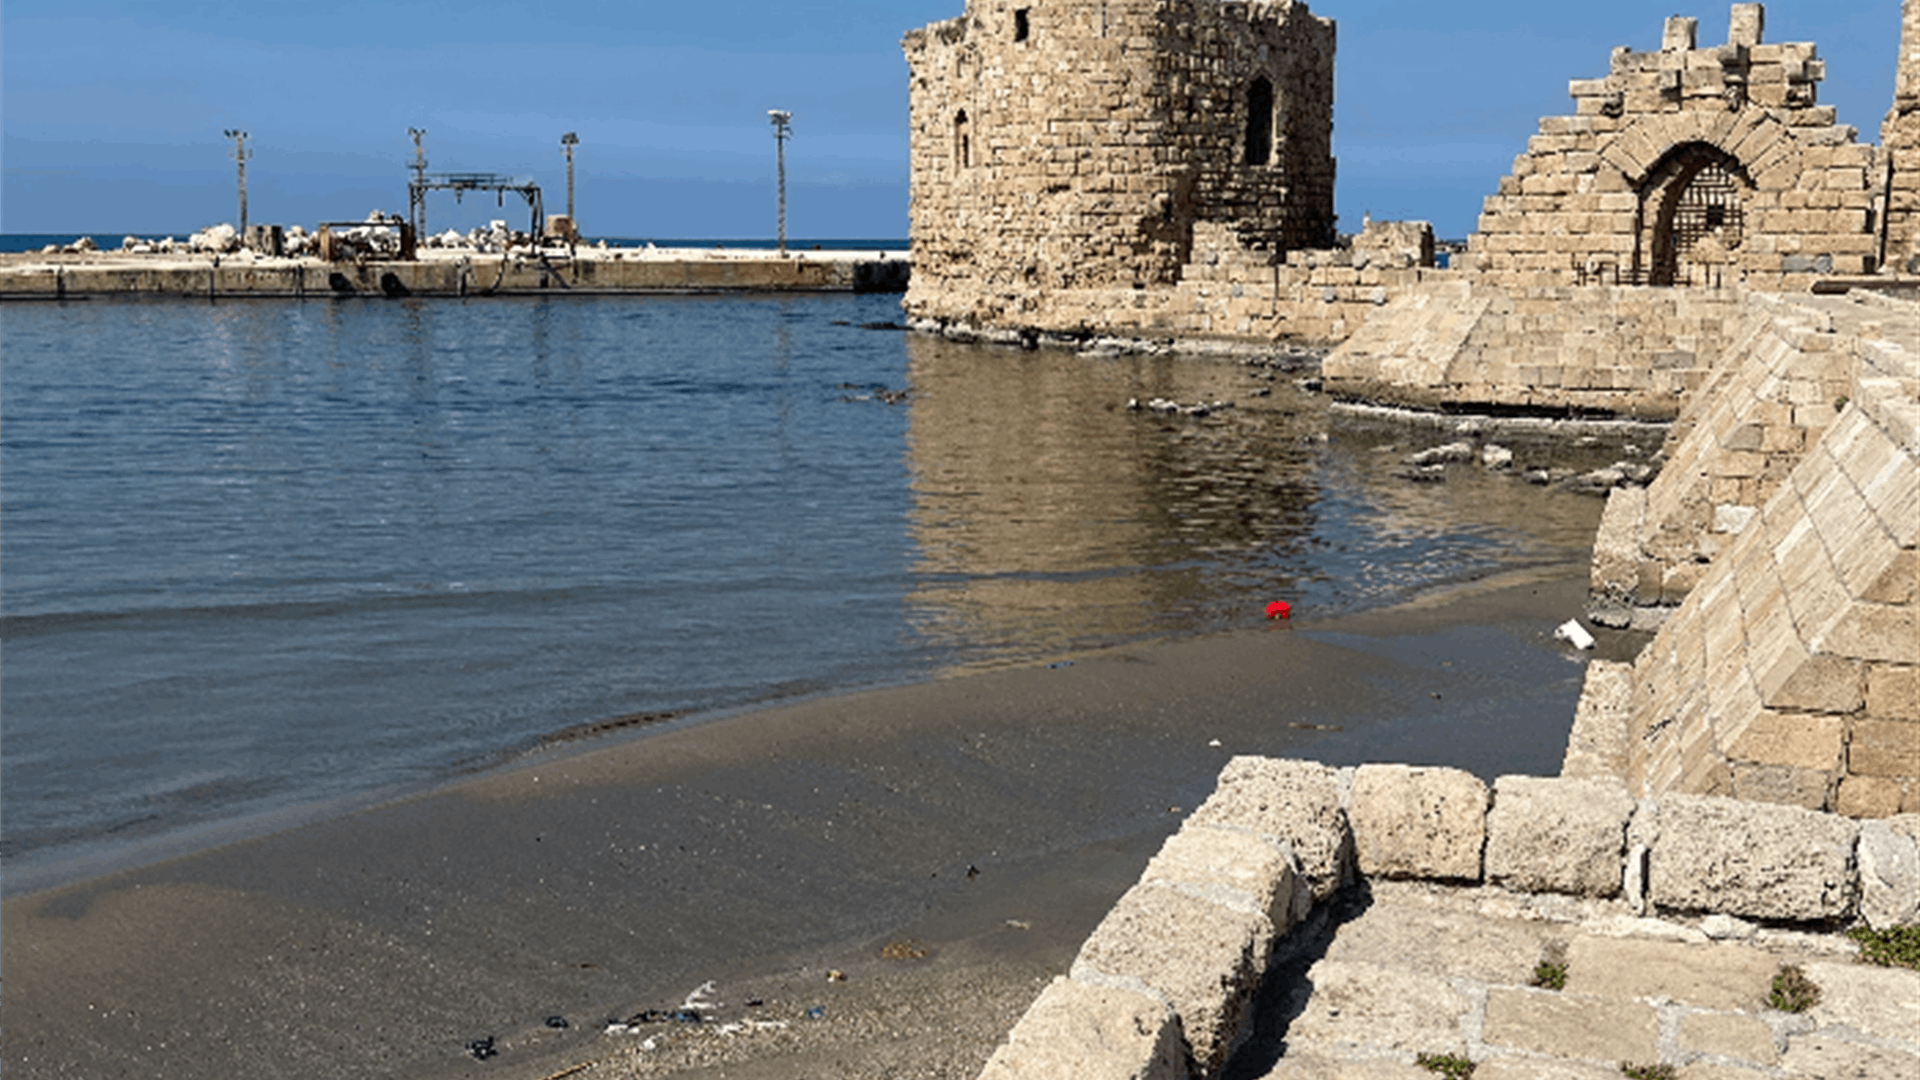 Experts assure receding sea water in Sidon is normal: report 